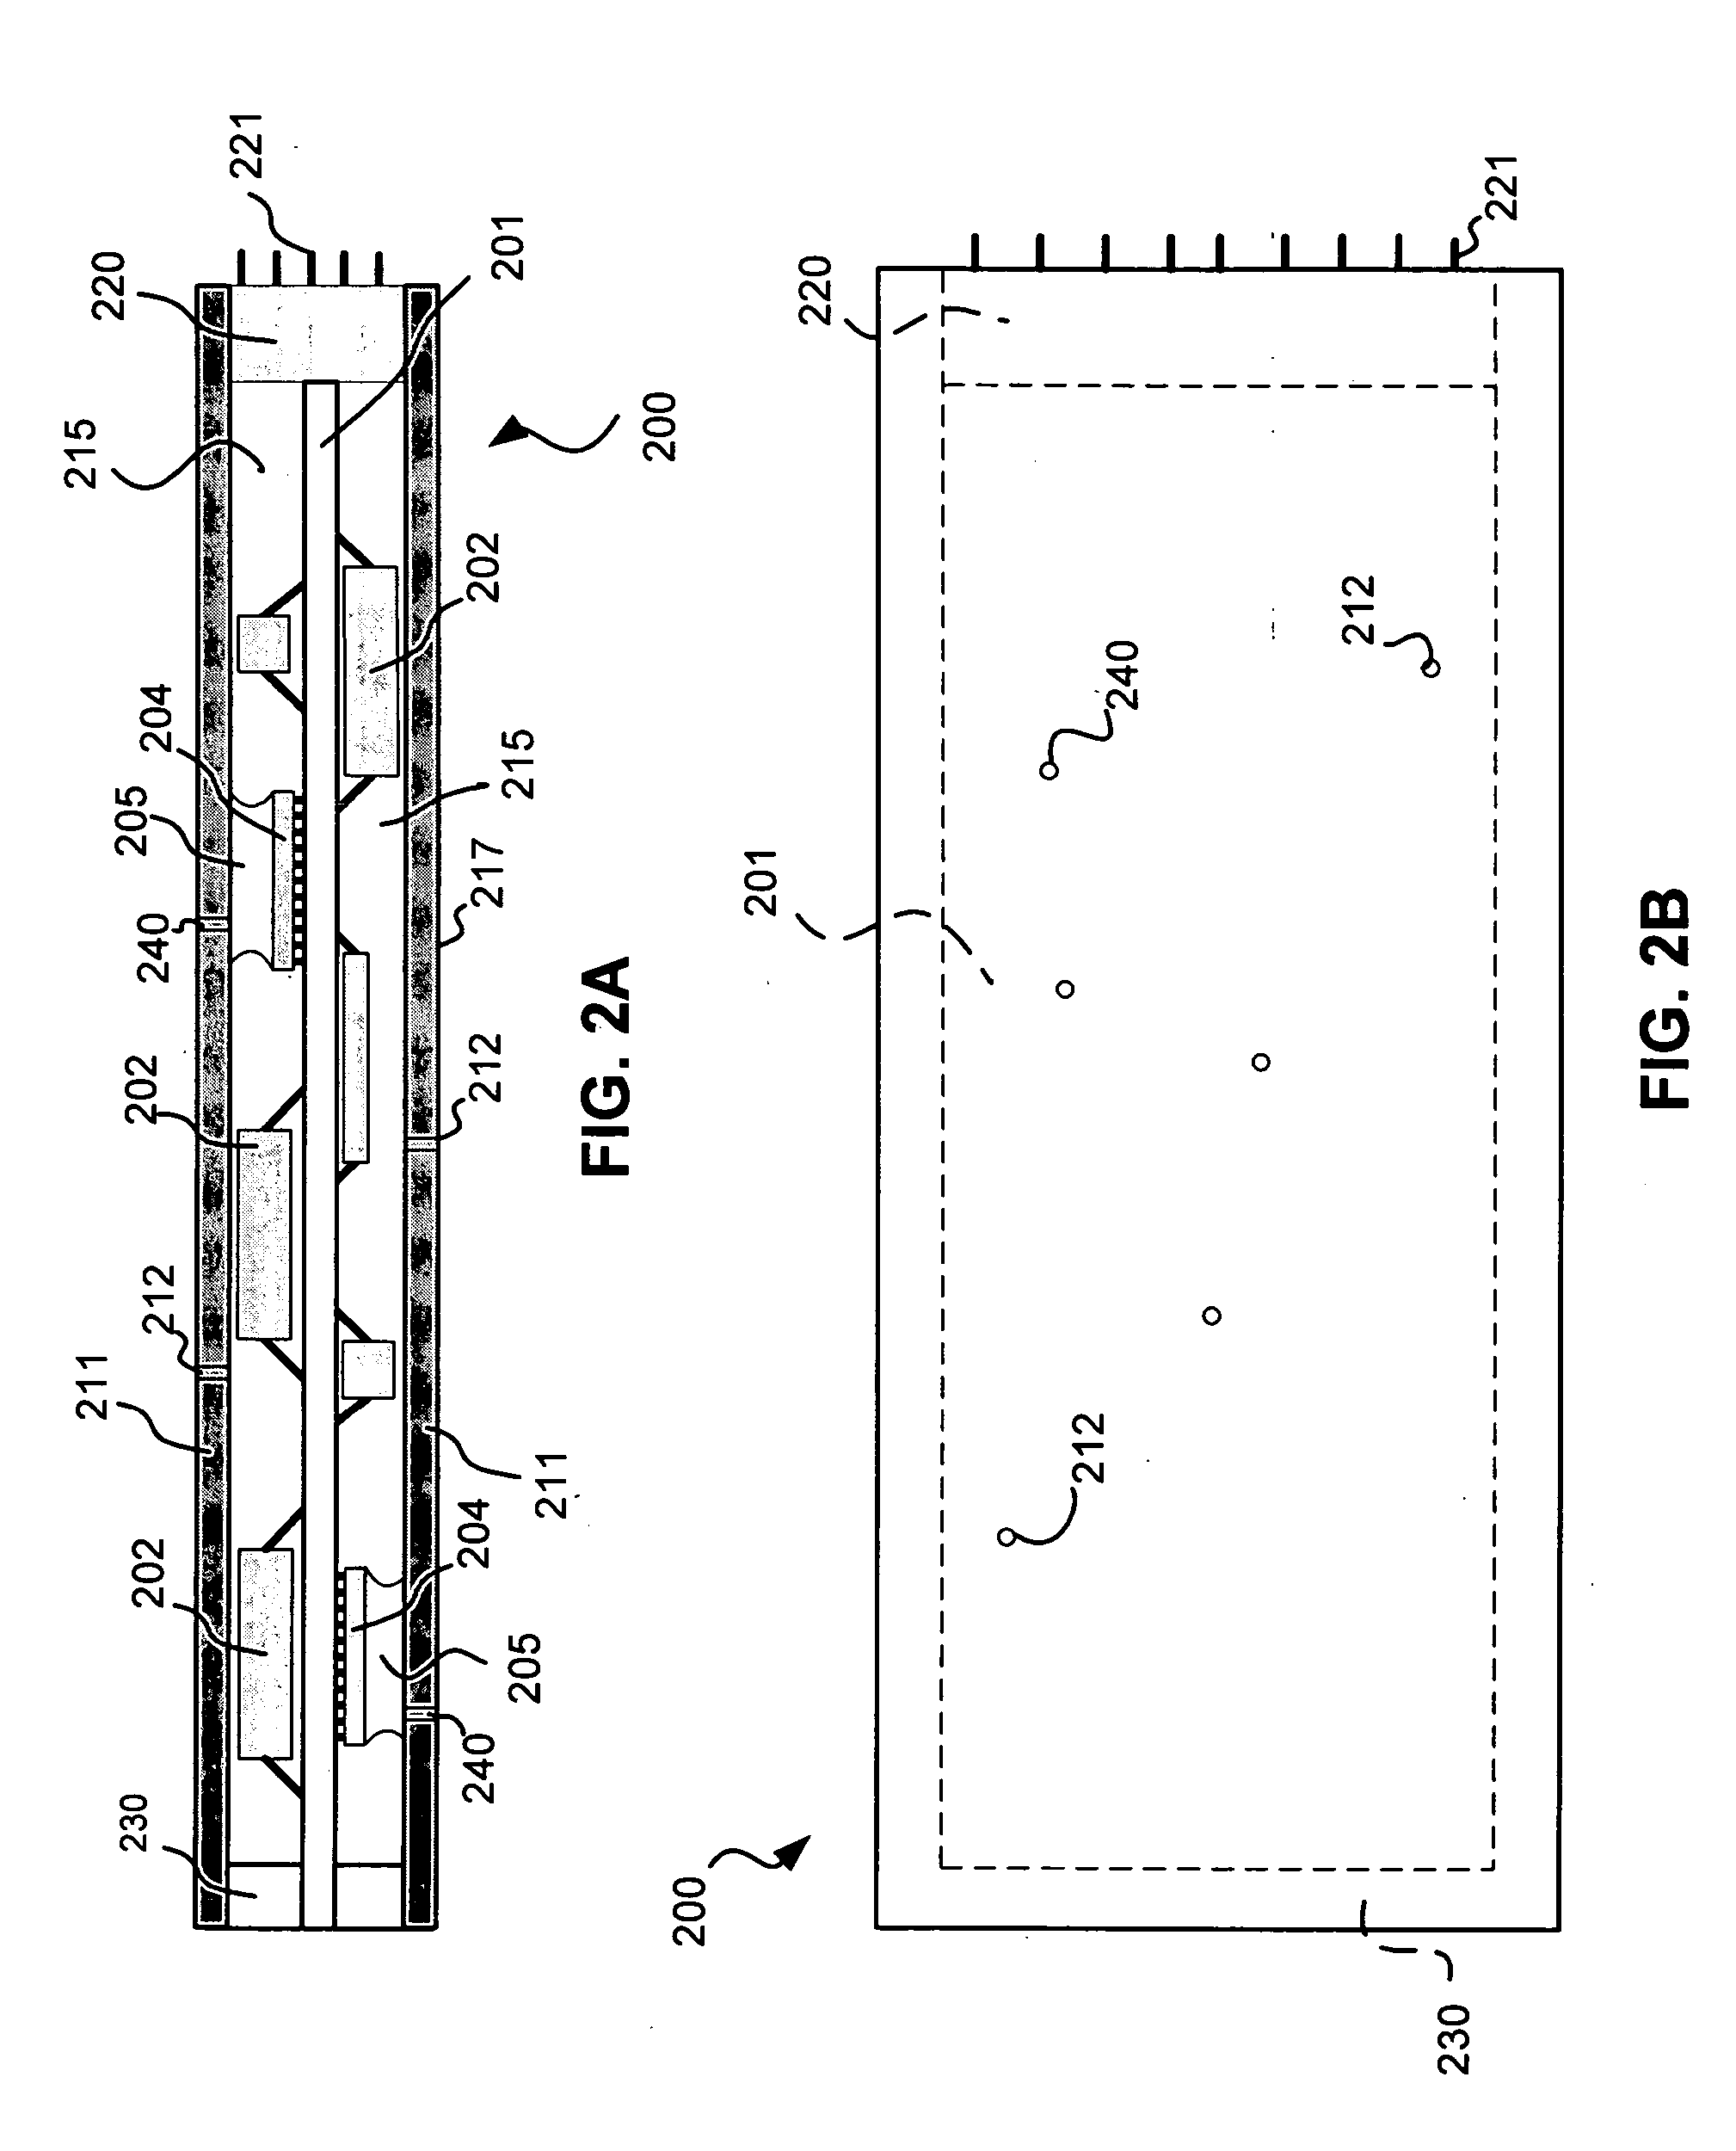 Environmentally tuned circuit card assembly and method for manufacturing the same